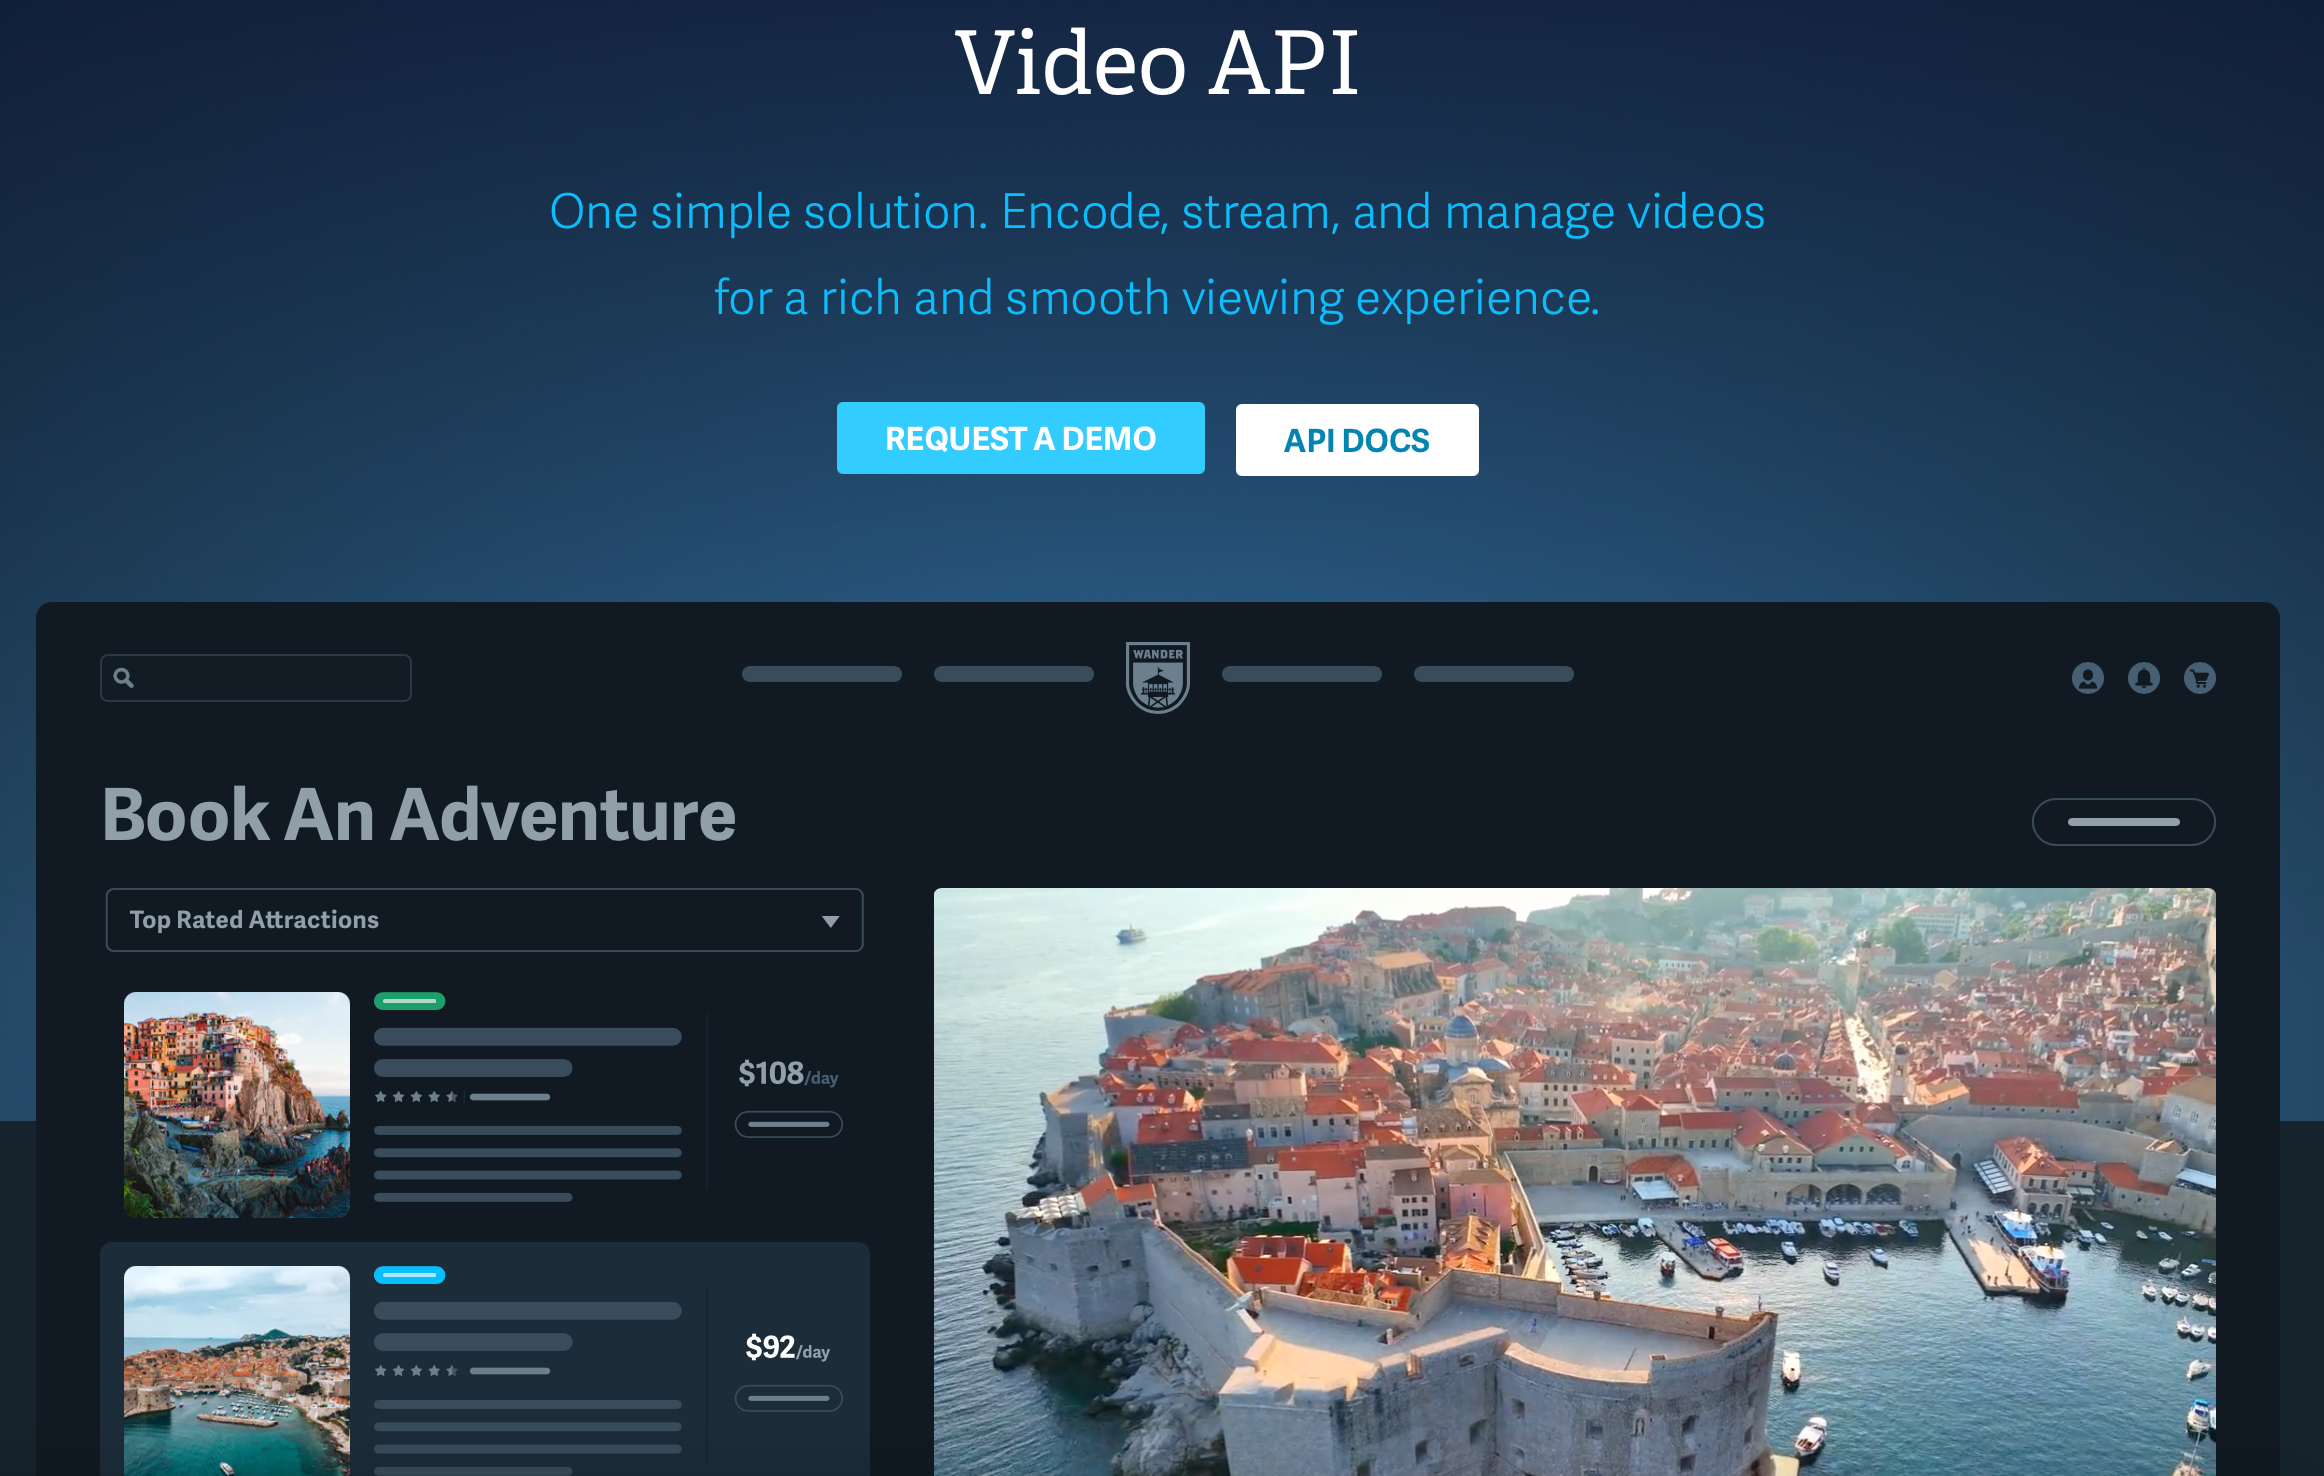 imgix Video API - With the imgix Video API, your videos will never buffer! We encode your videos using Adaptive Bitrate Streaming (ABS), which adjusts resolutions based on the viewer’s bandwidth.